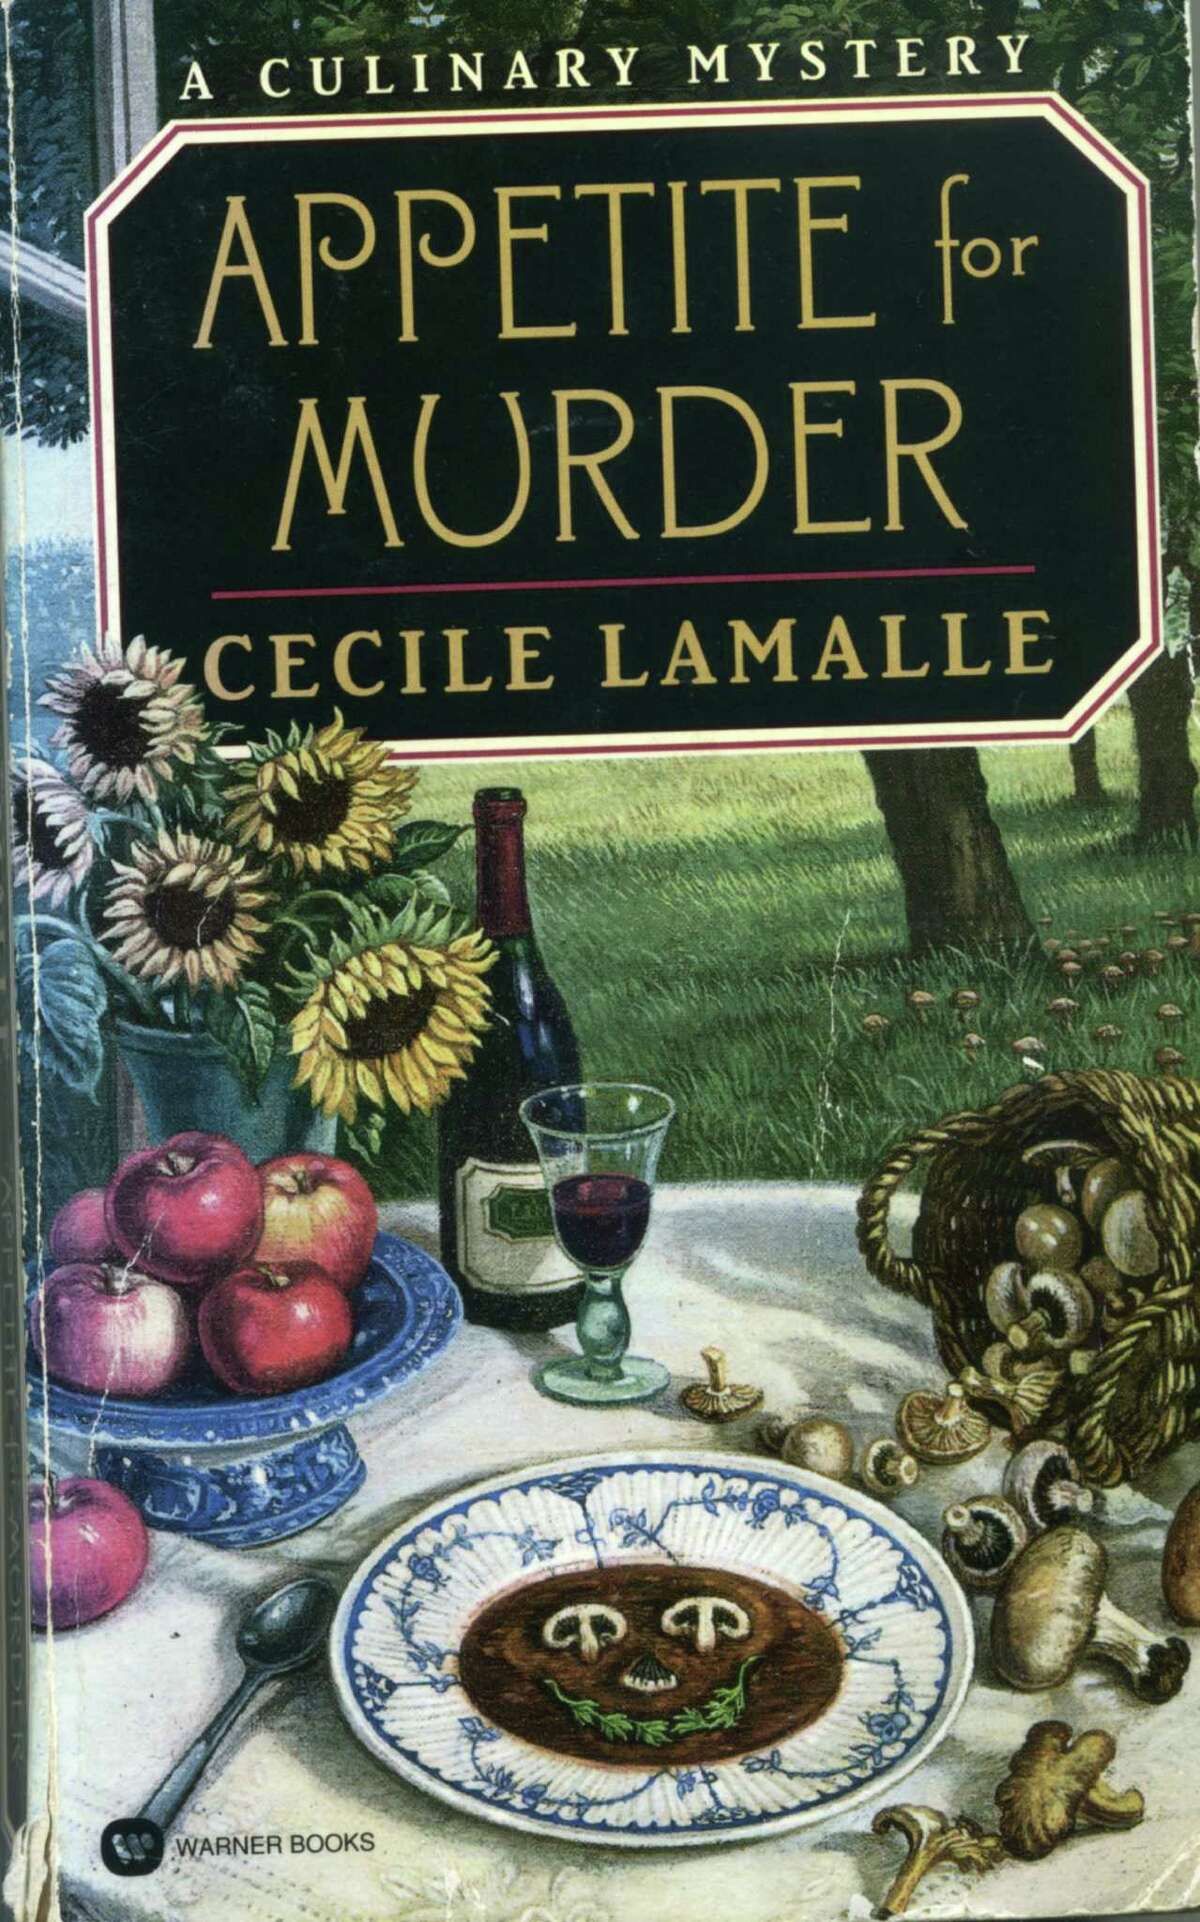 "Appetite for Murder" by Cecile Lamalle